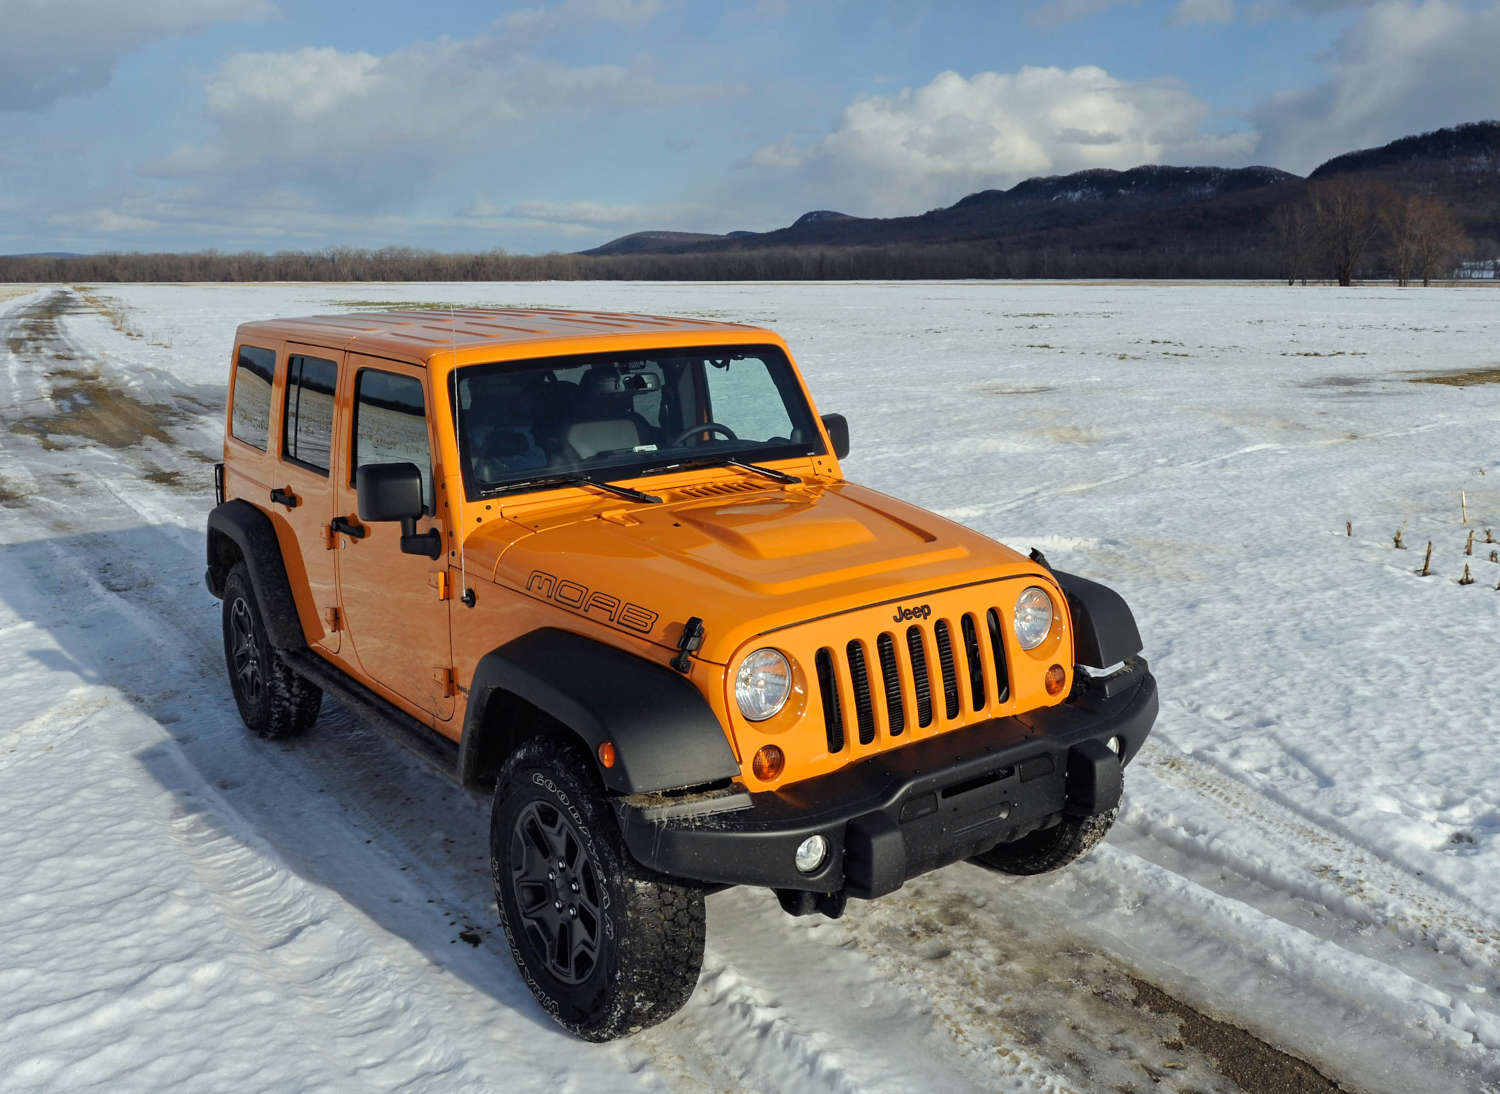 A Jeep Wrangler SUV is not as heavy as others, under 5,000 pounds